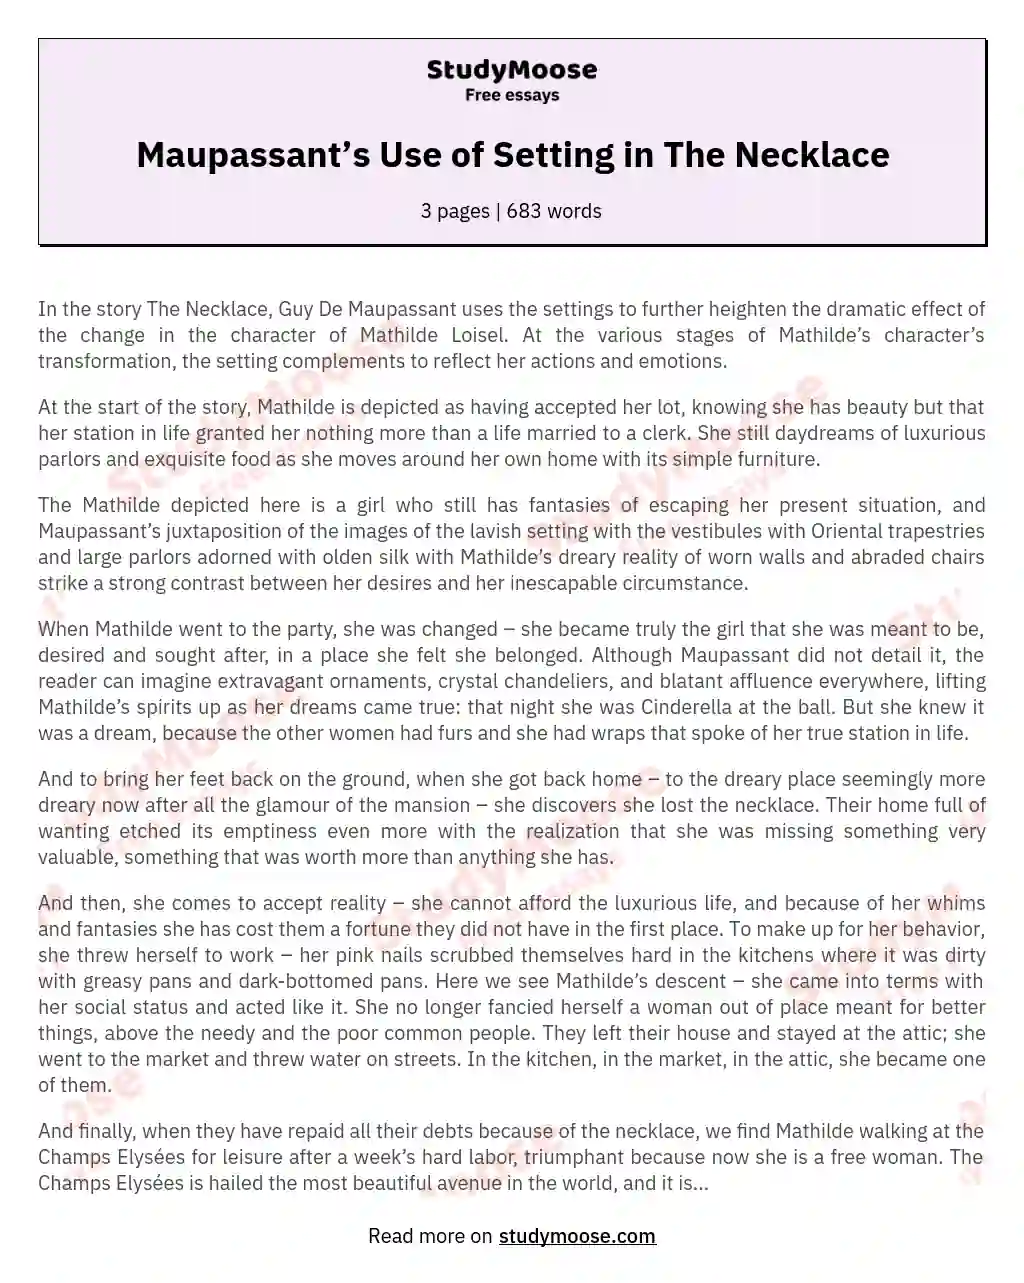 Maupassant’s Use of Setting in The Necklace essay